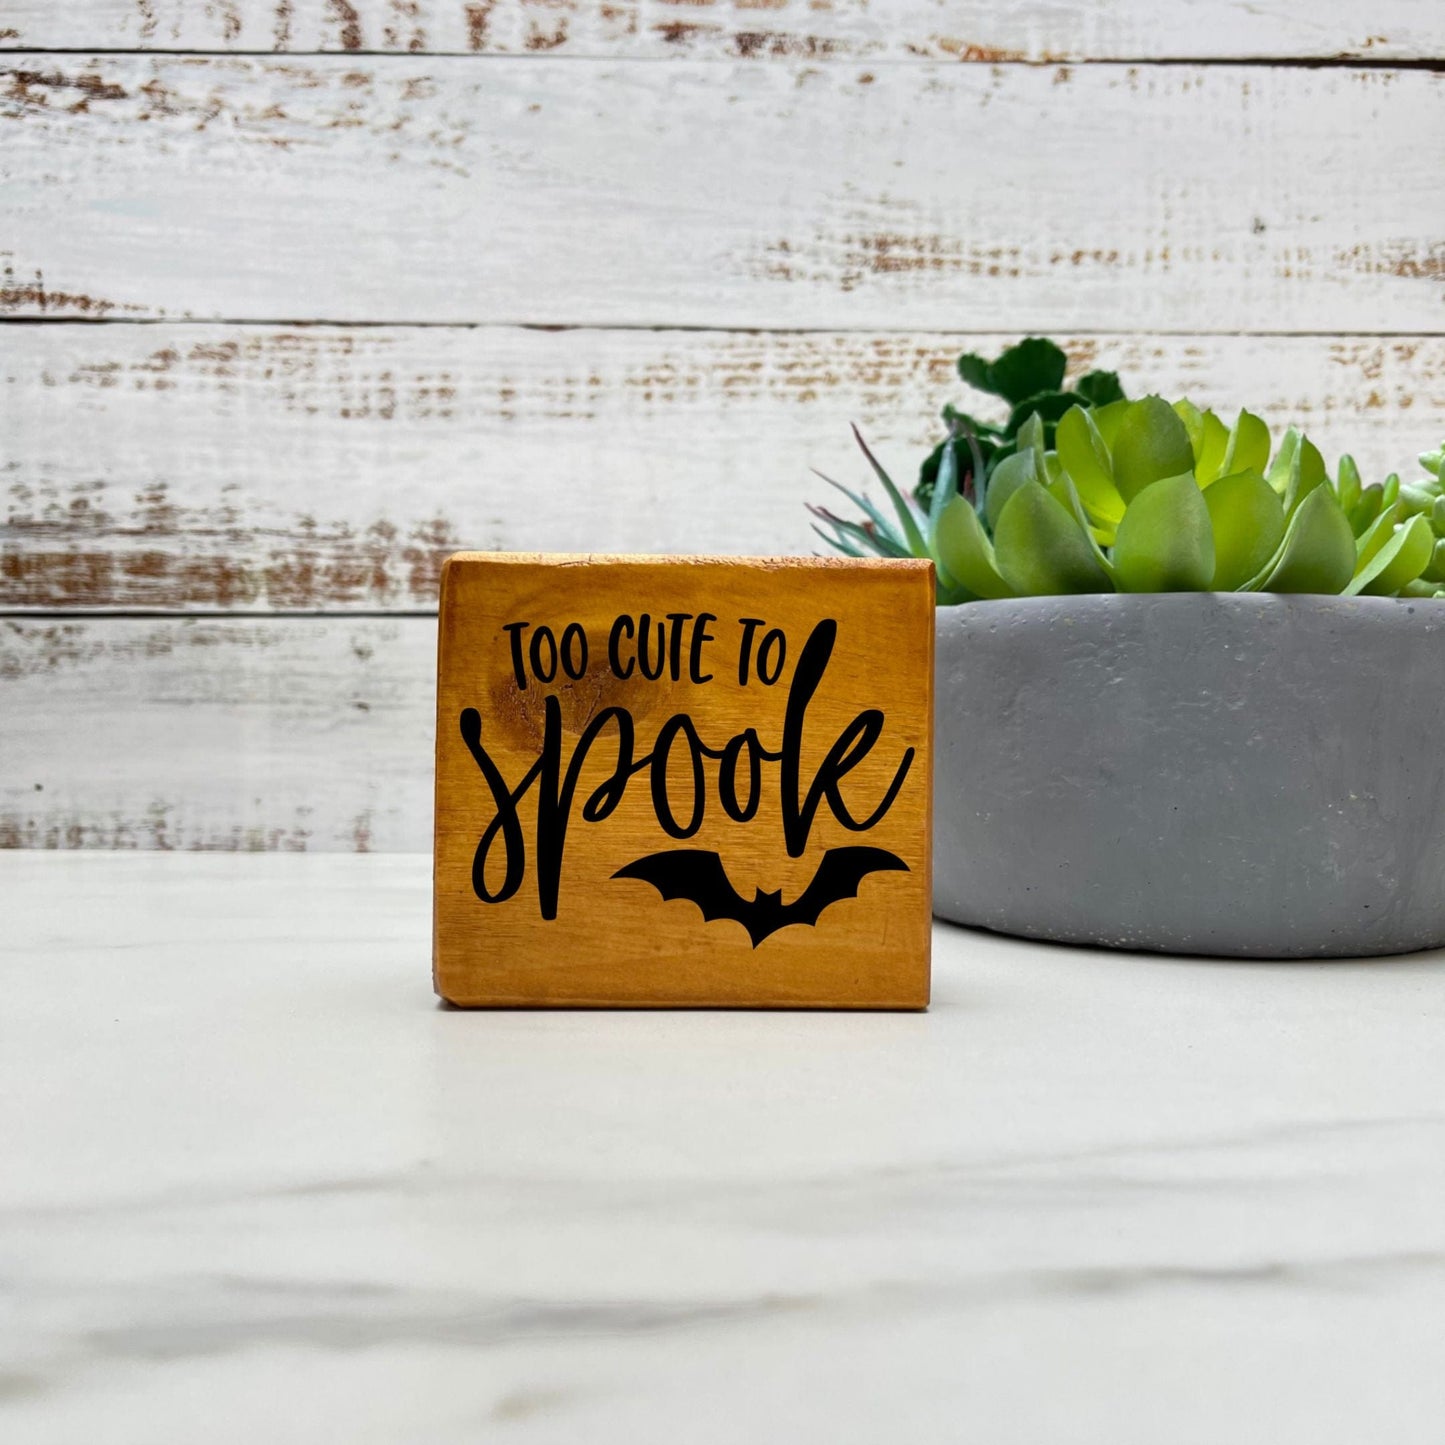 Too cute to spook Wood Sign, Halloween Wood Sign, Halloween Home Decor, Spooky Decor